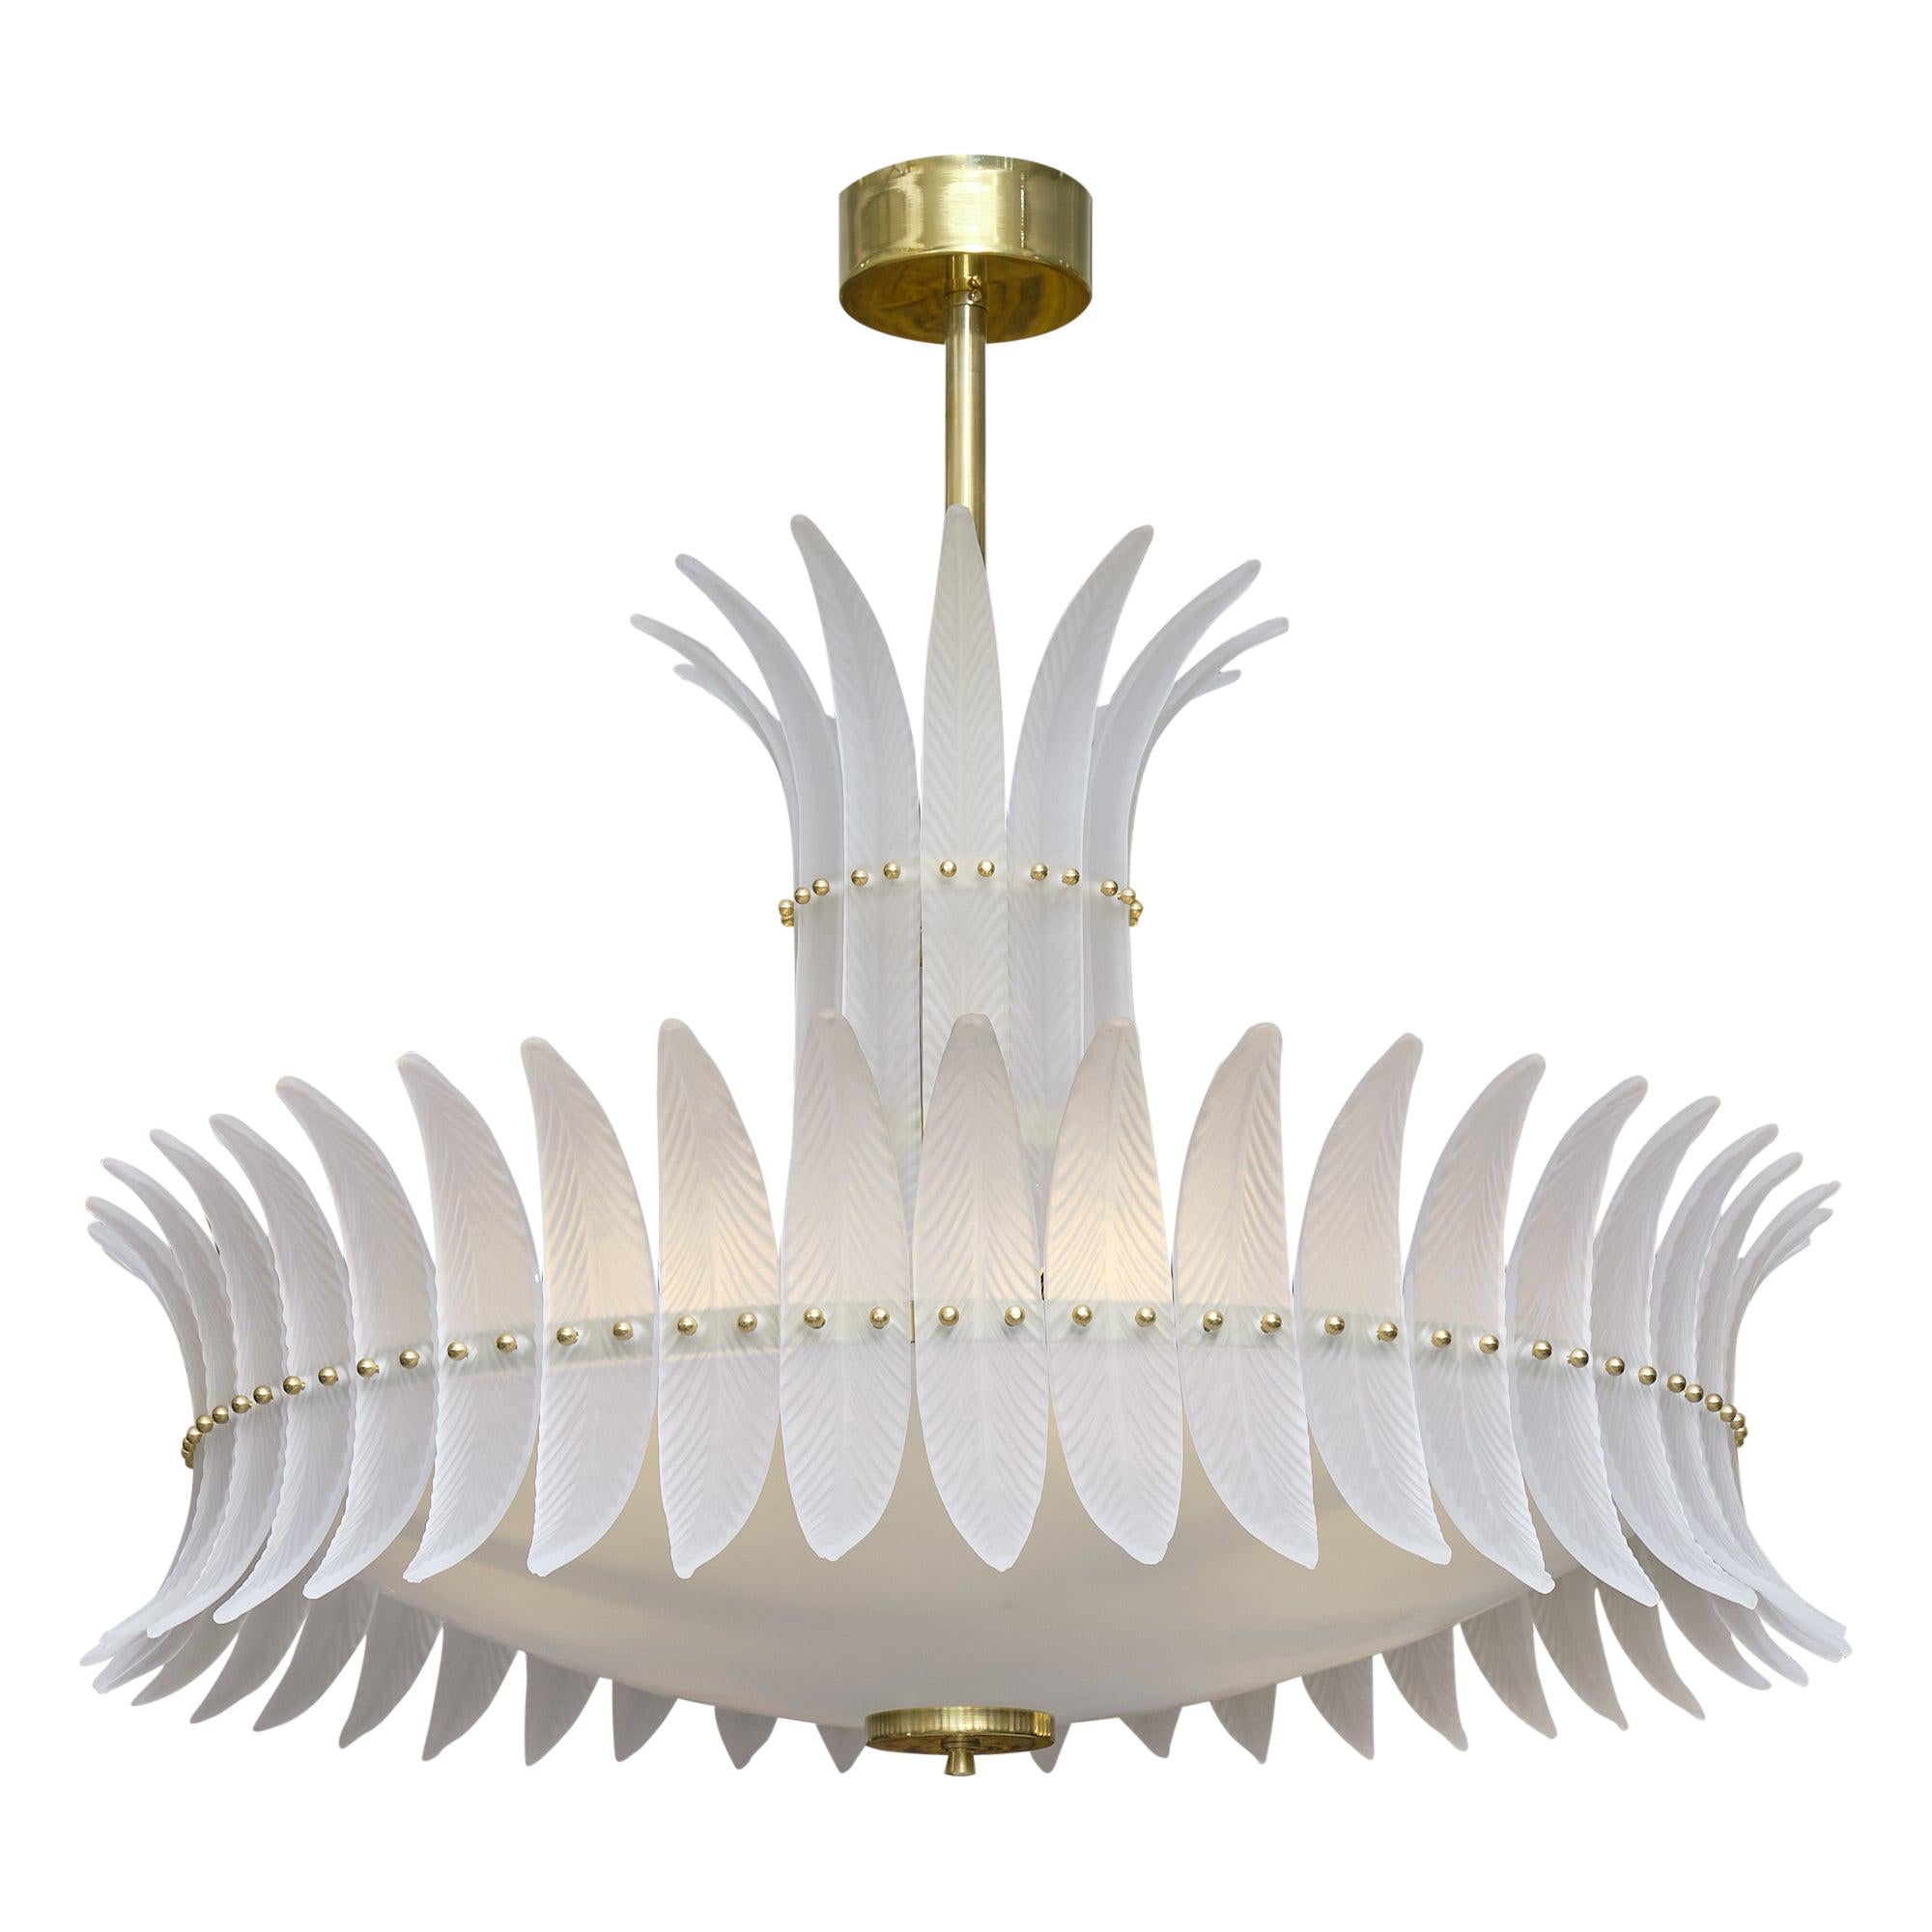 Art Deco Style "Plume" Murano Glass Chandelier For Sale